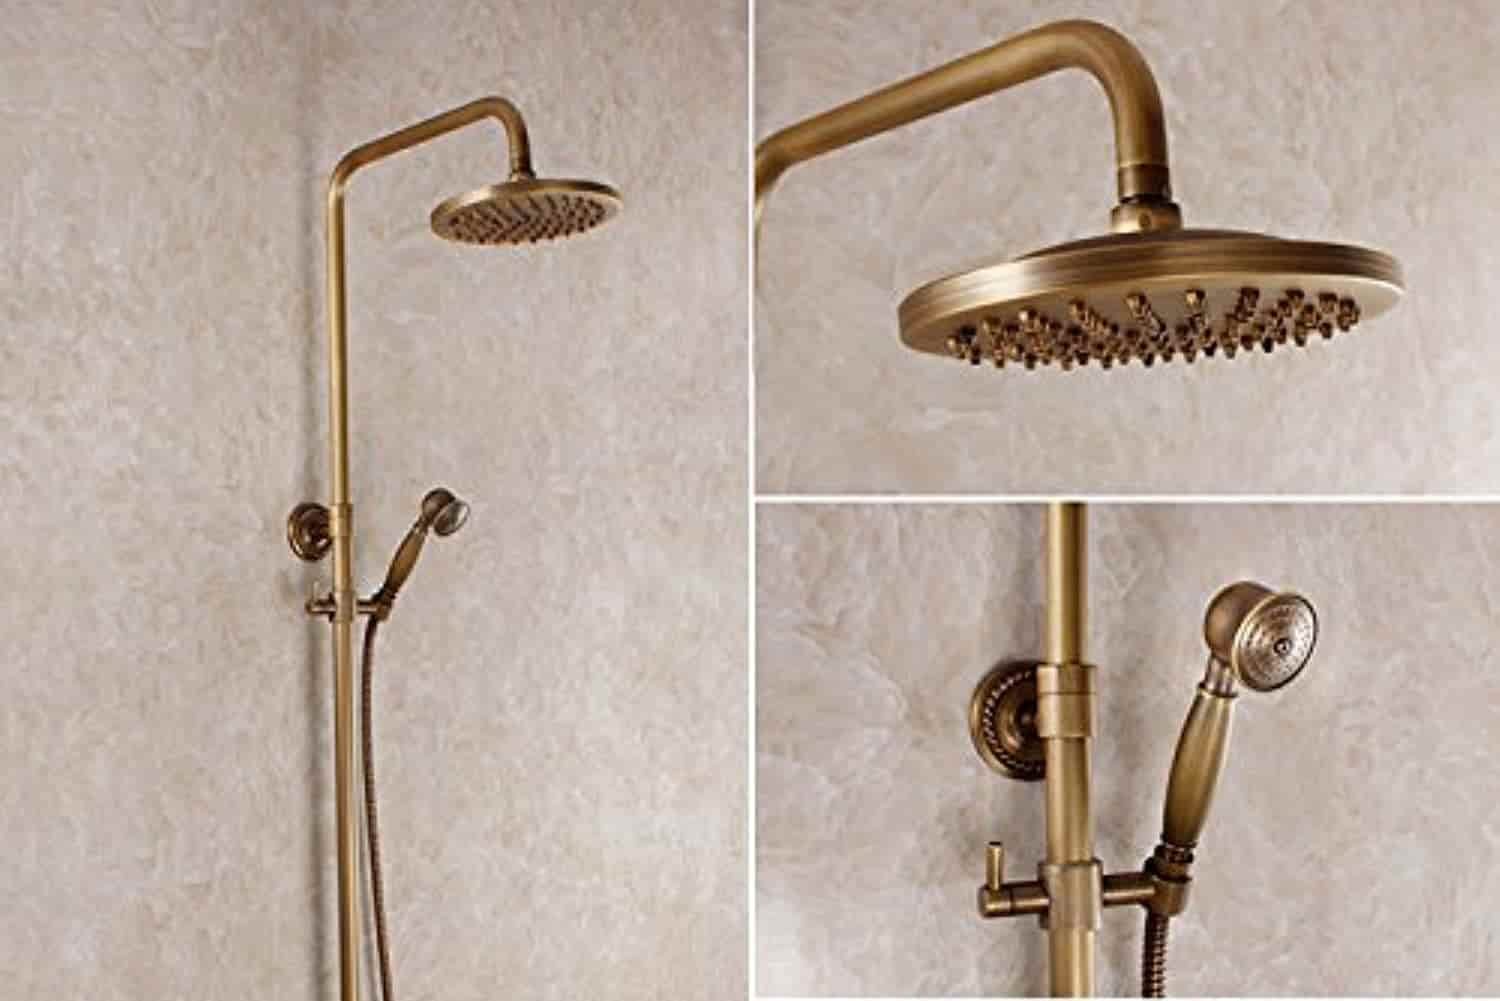 The Best Price for Buying Brass Shower Holder